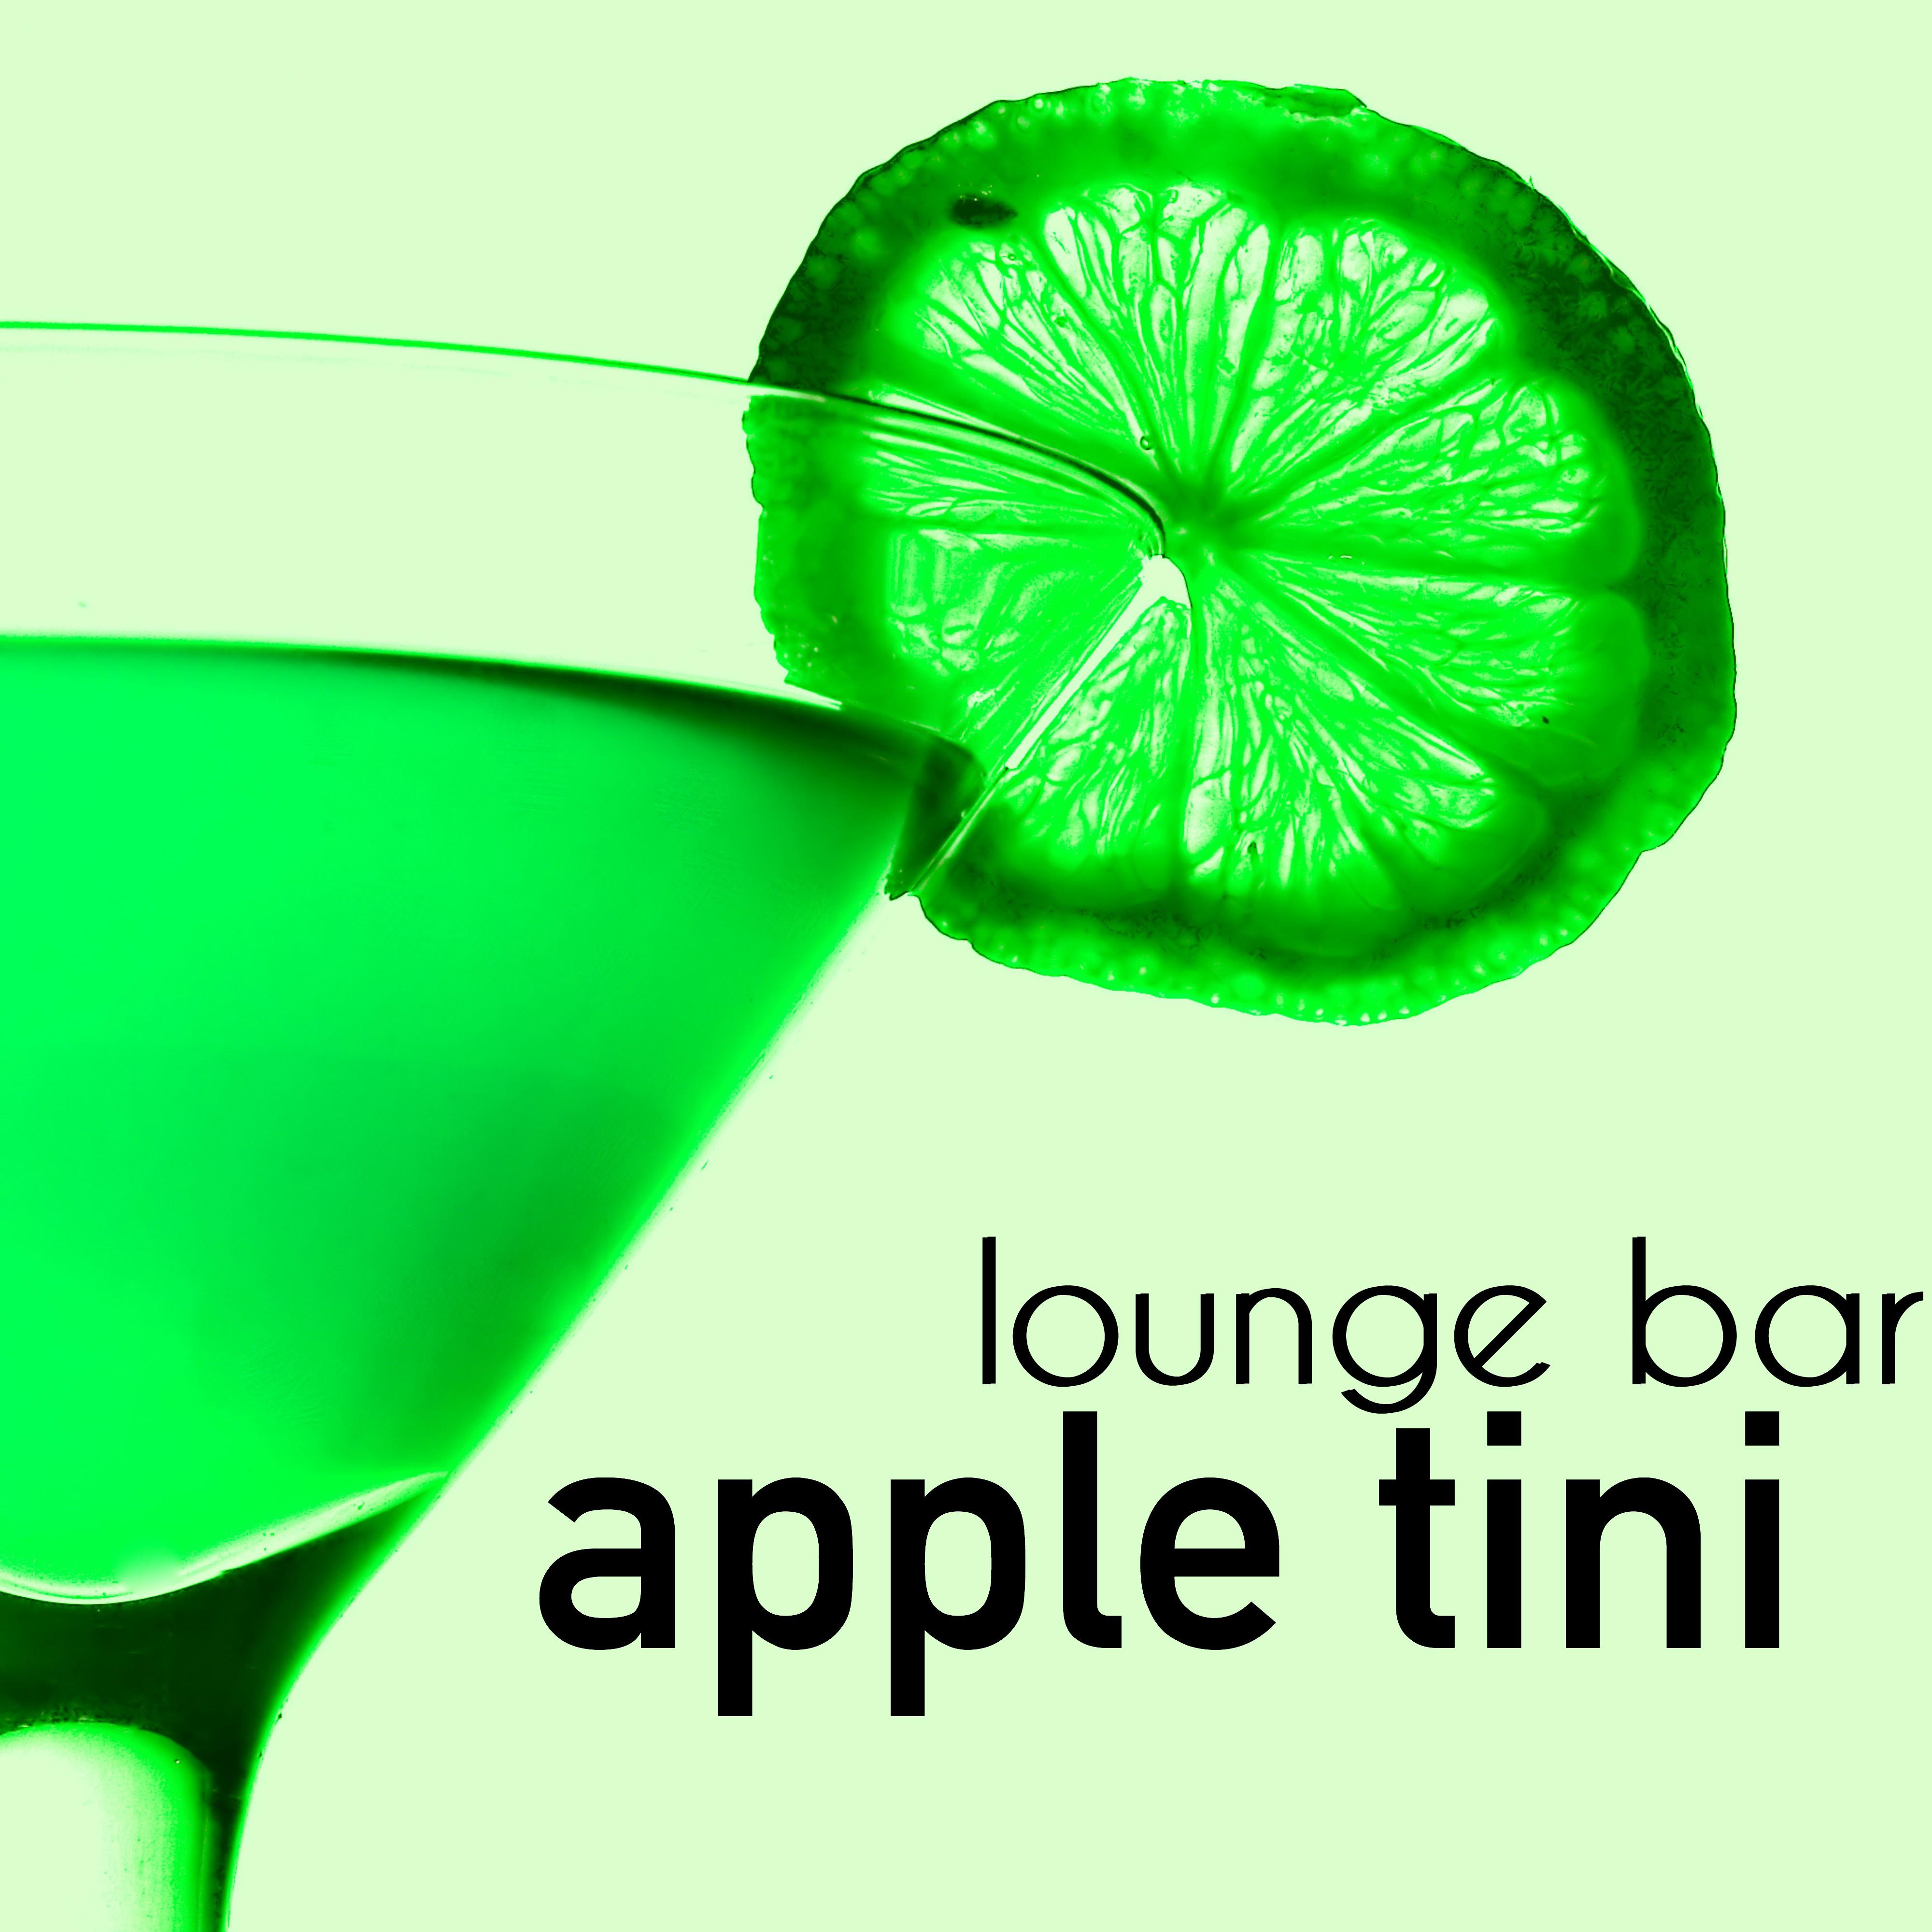 Apple Tini – Soothing Music for Lounge Bar, Relaxing Moments with Friends, Talk, Drink and Party Night